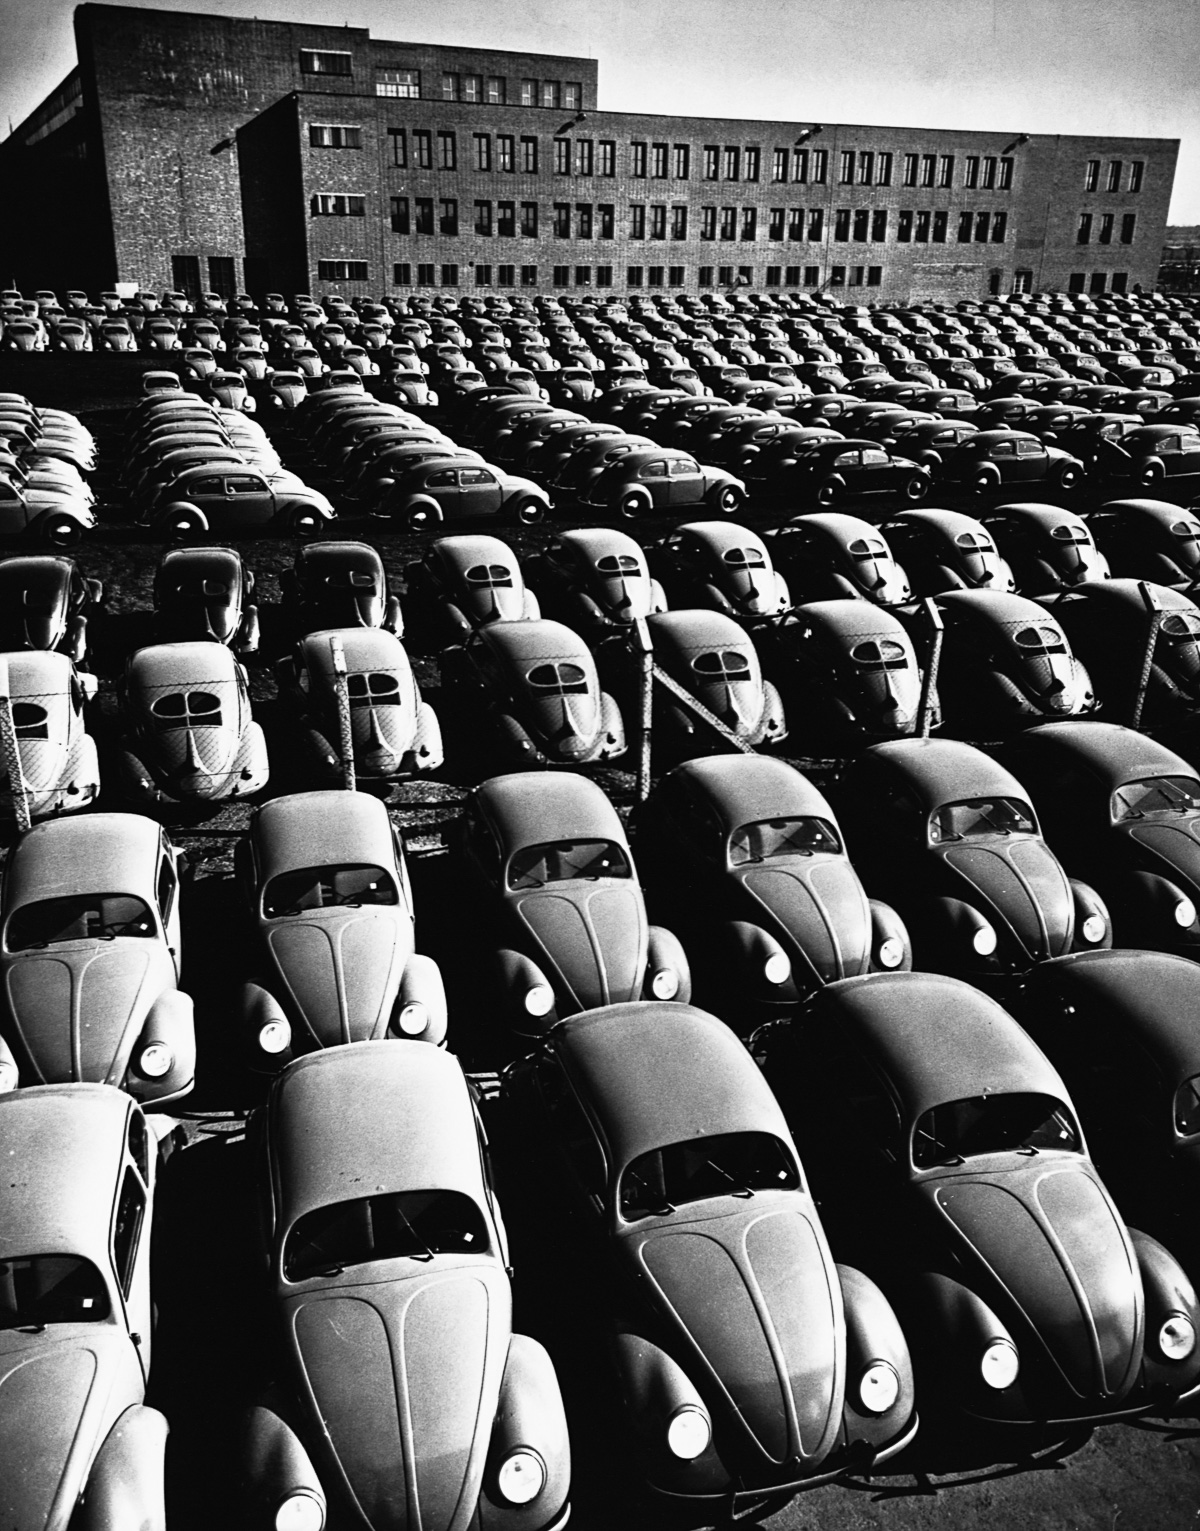 1953-1954, Germany --- Finished Volkswagen "Beetles" fill a storage yard at the VW factory near Brunswich, West Germany, in the early 1950s. | Location: Brunswick, West Germany. --- Image by © CORBIS